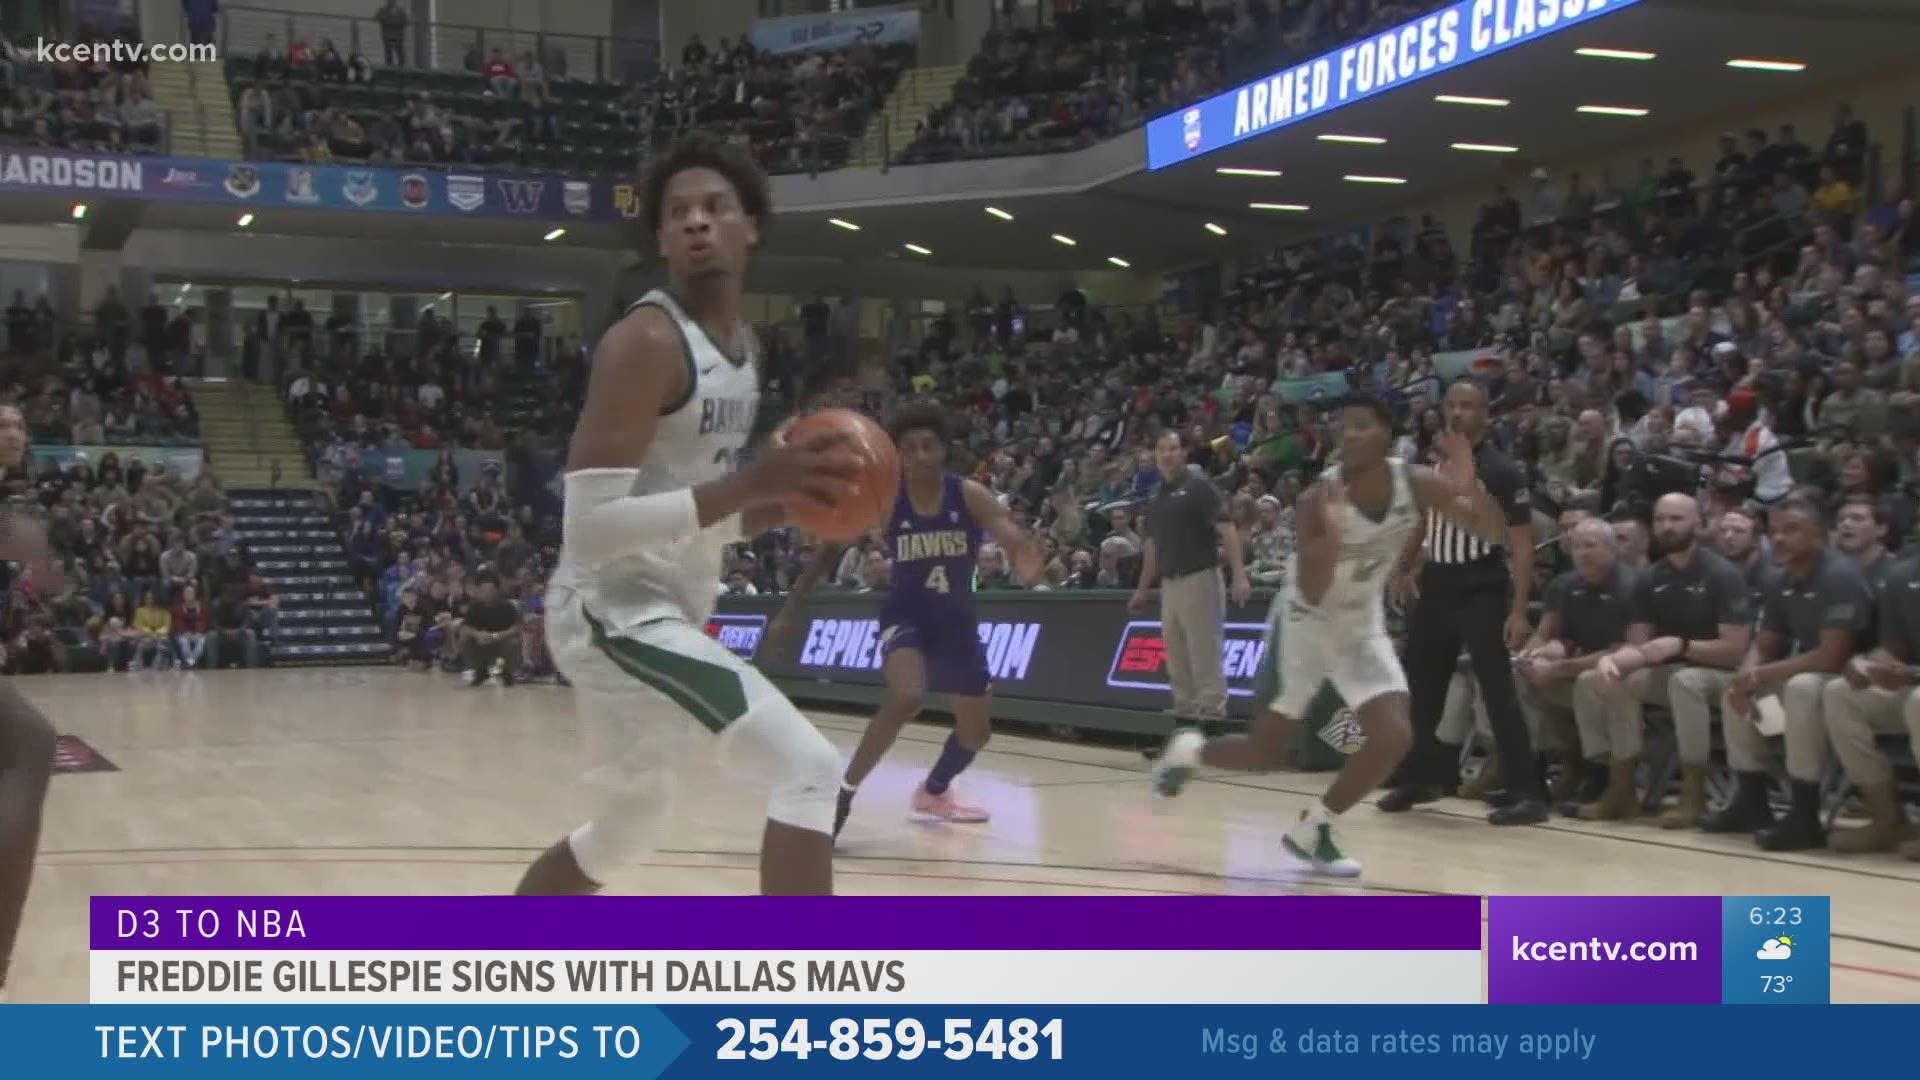 Gillespie just signed a free agent contract with the Dallas basketball team, saying it was a result of his hard work throughout the past few years.